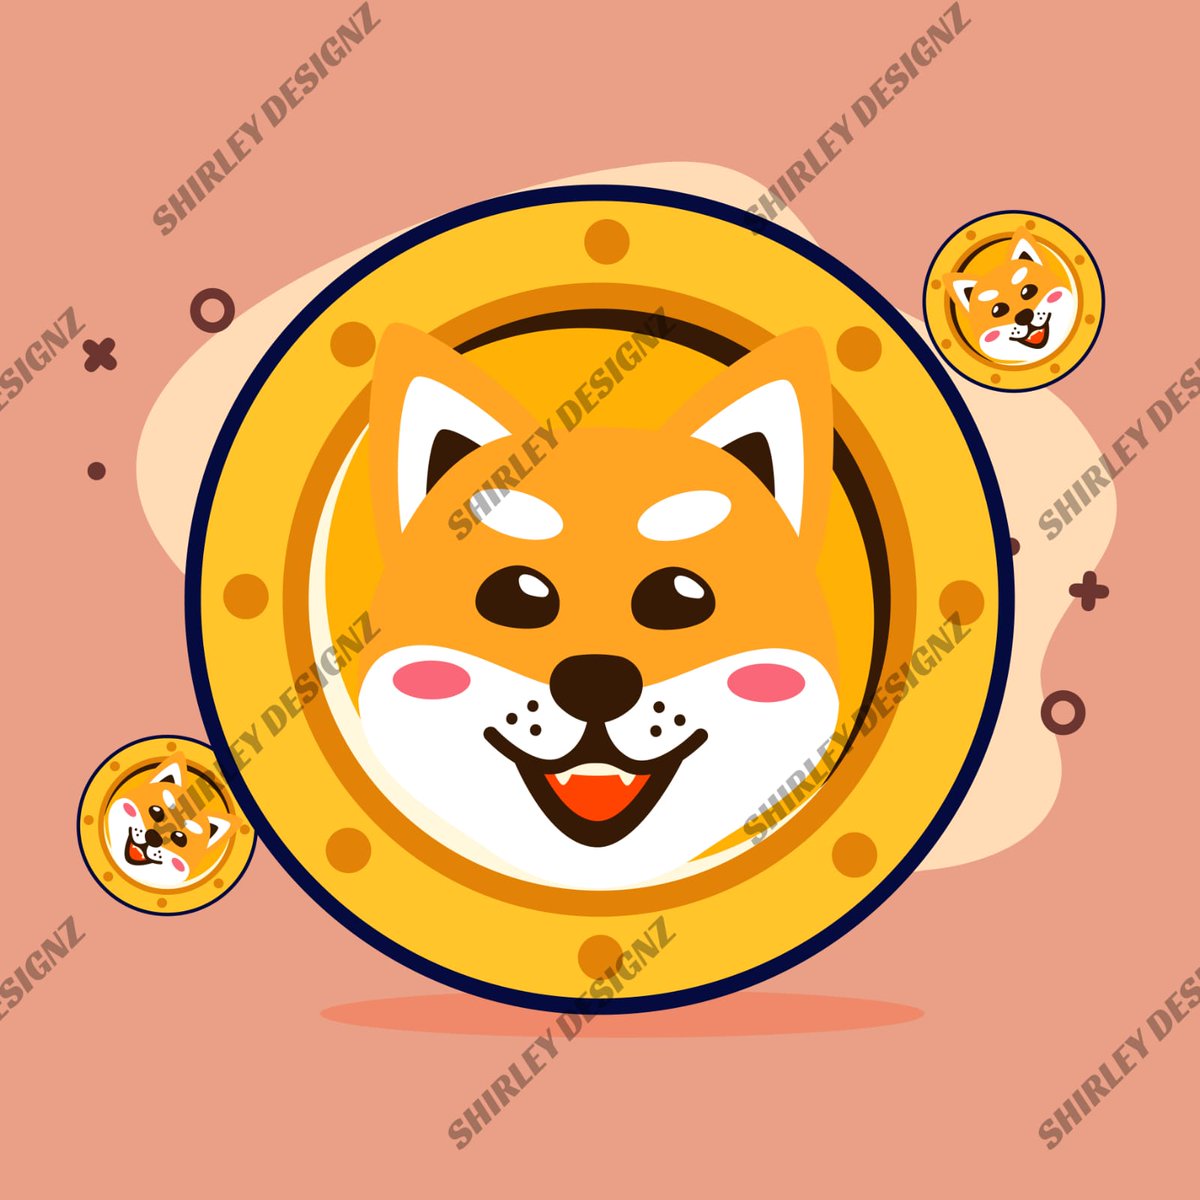 Check out our client Memecoin! It's the perfect blend of creativity and awesomeness. Get ready to be amazed!💥📷
#doge #investment #nft #binance #shitcoin #cryptoworld #shibainu #cryptocurrencies #meme #blockchaintechnology #eth #cryptomarket #hodl #bitcointrading #cryptomemes